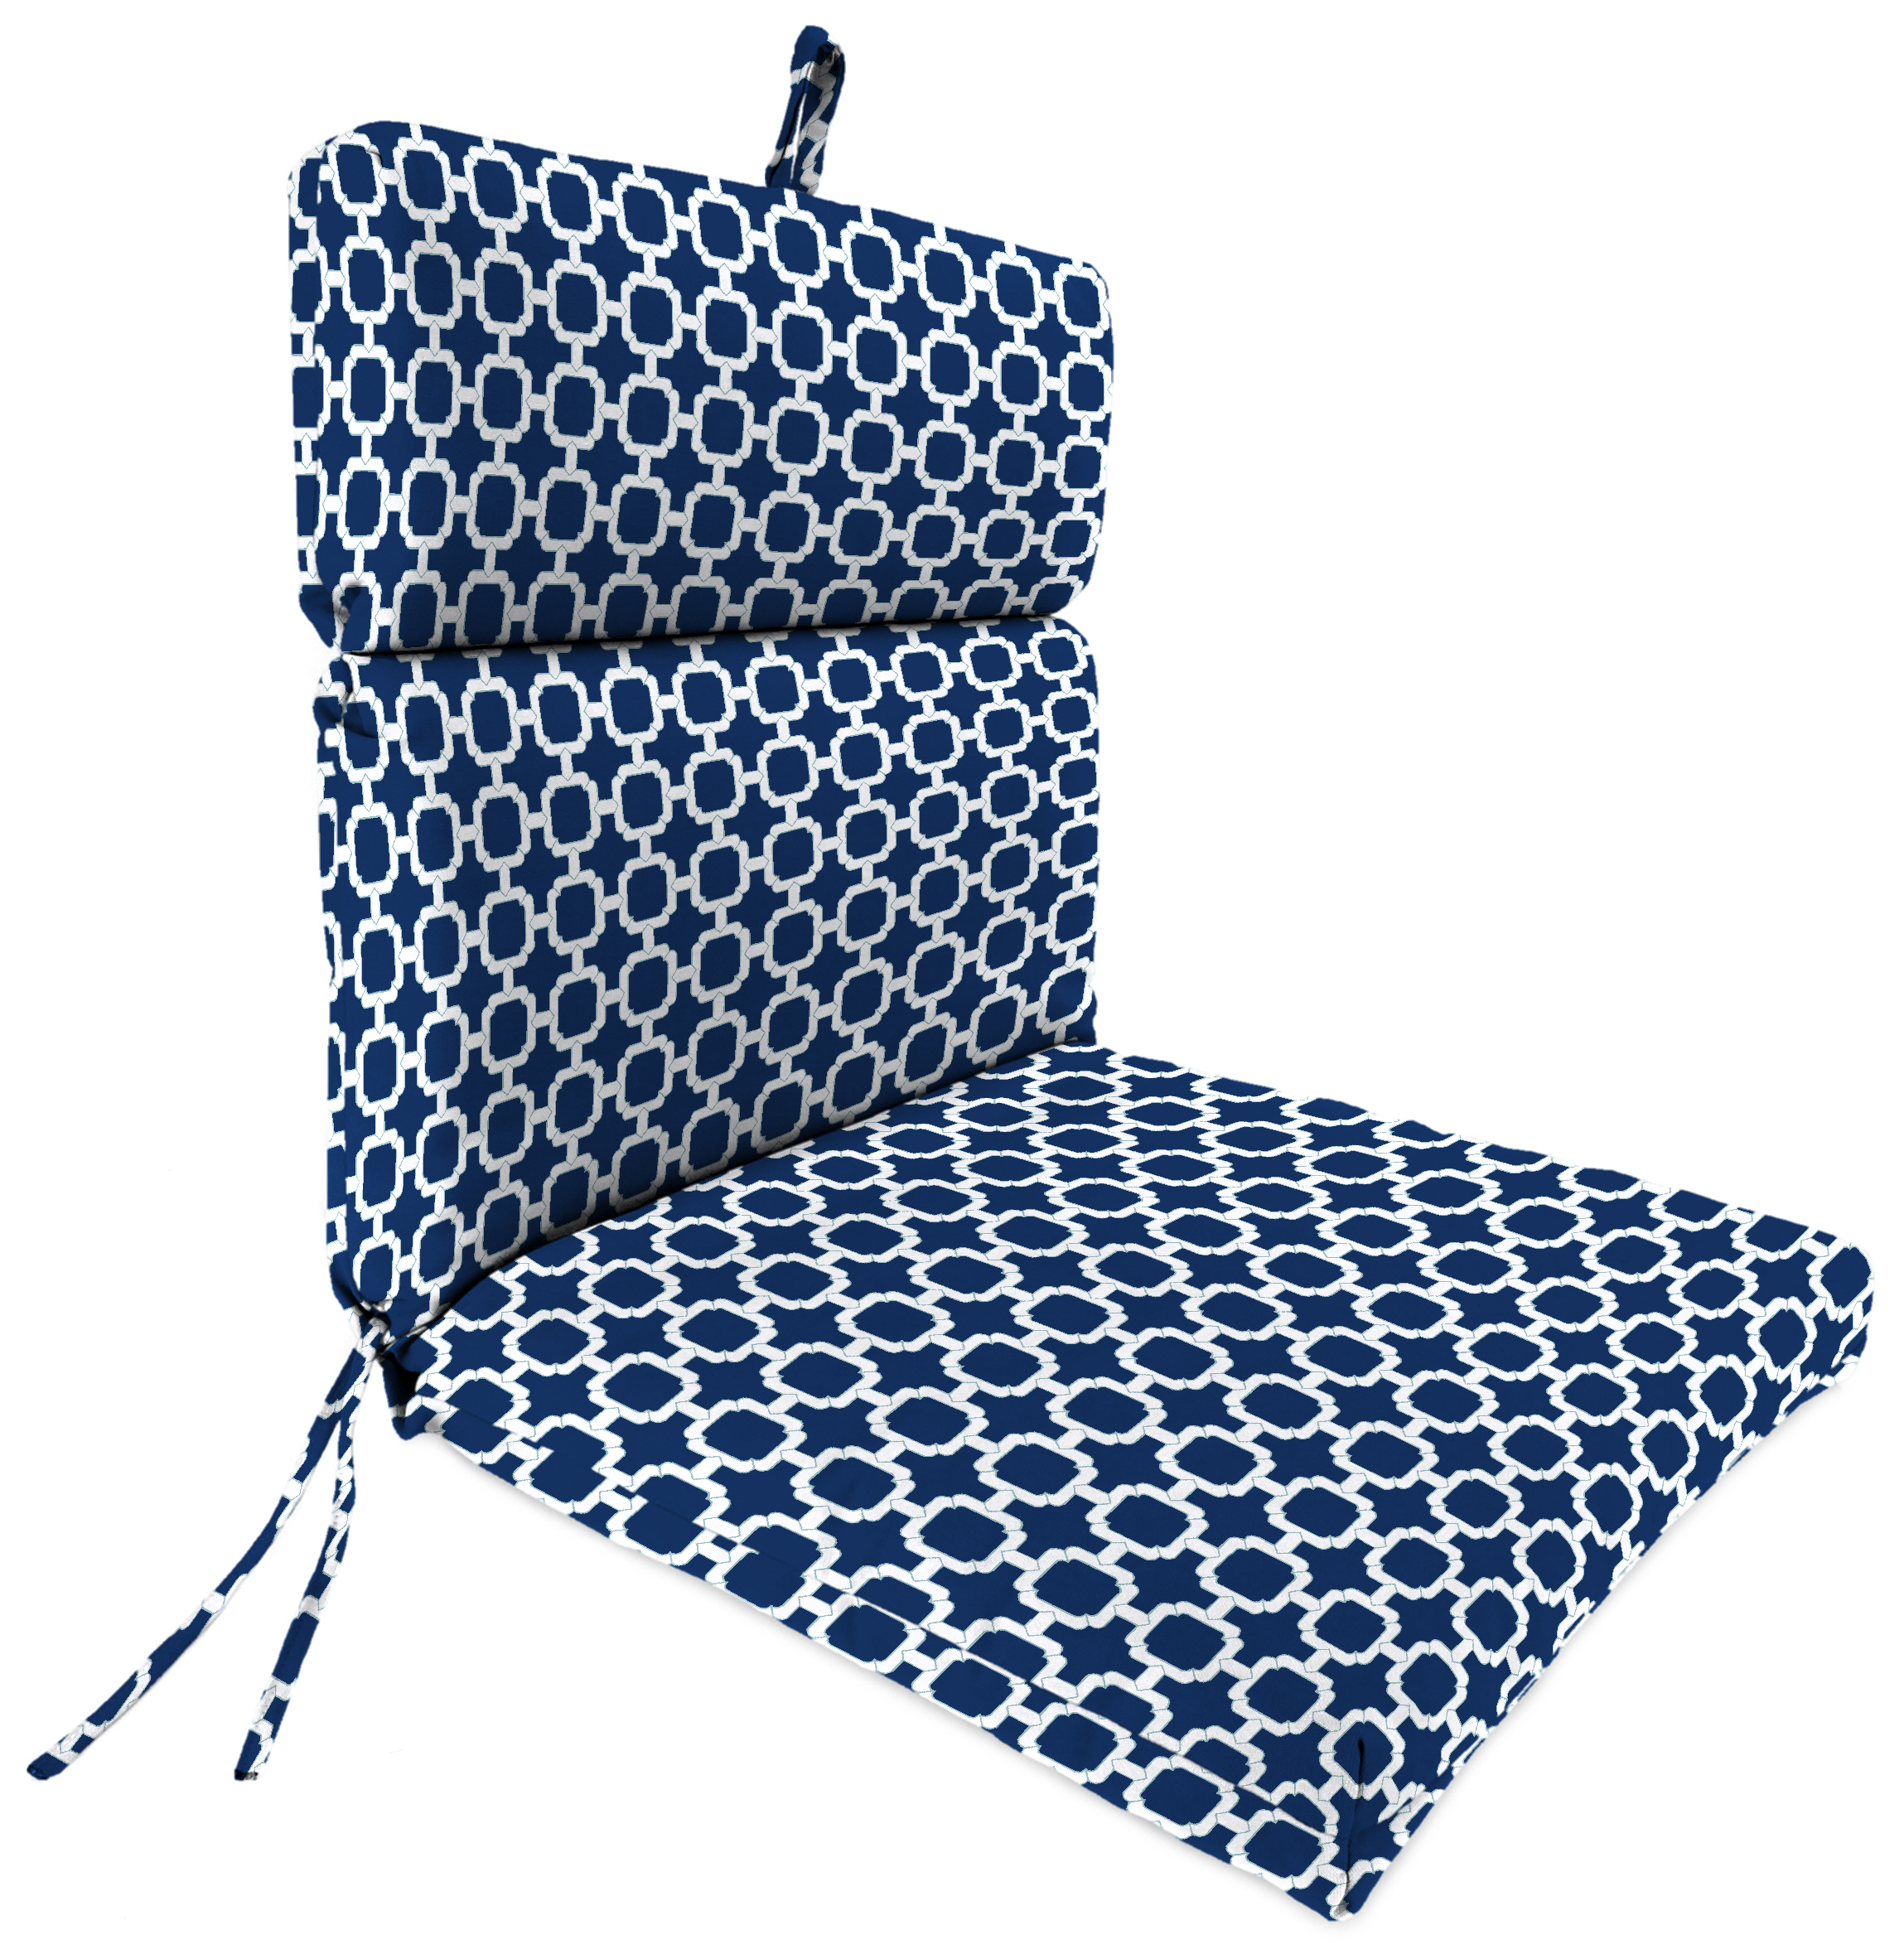 French Edge Patio Chair Cushion in Hockley Navy